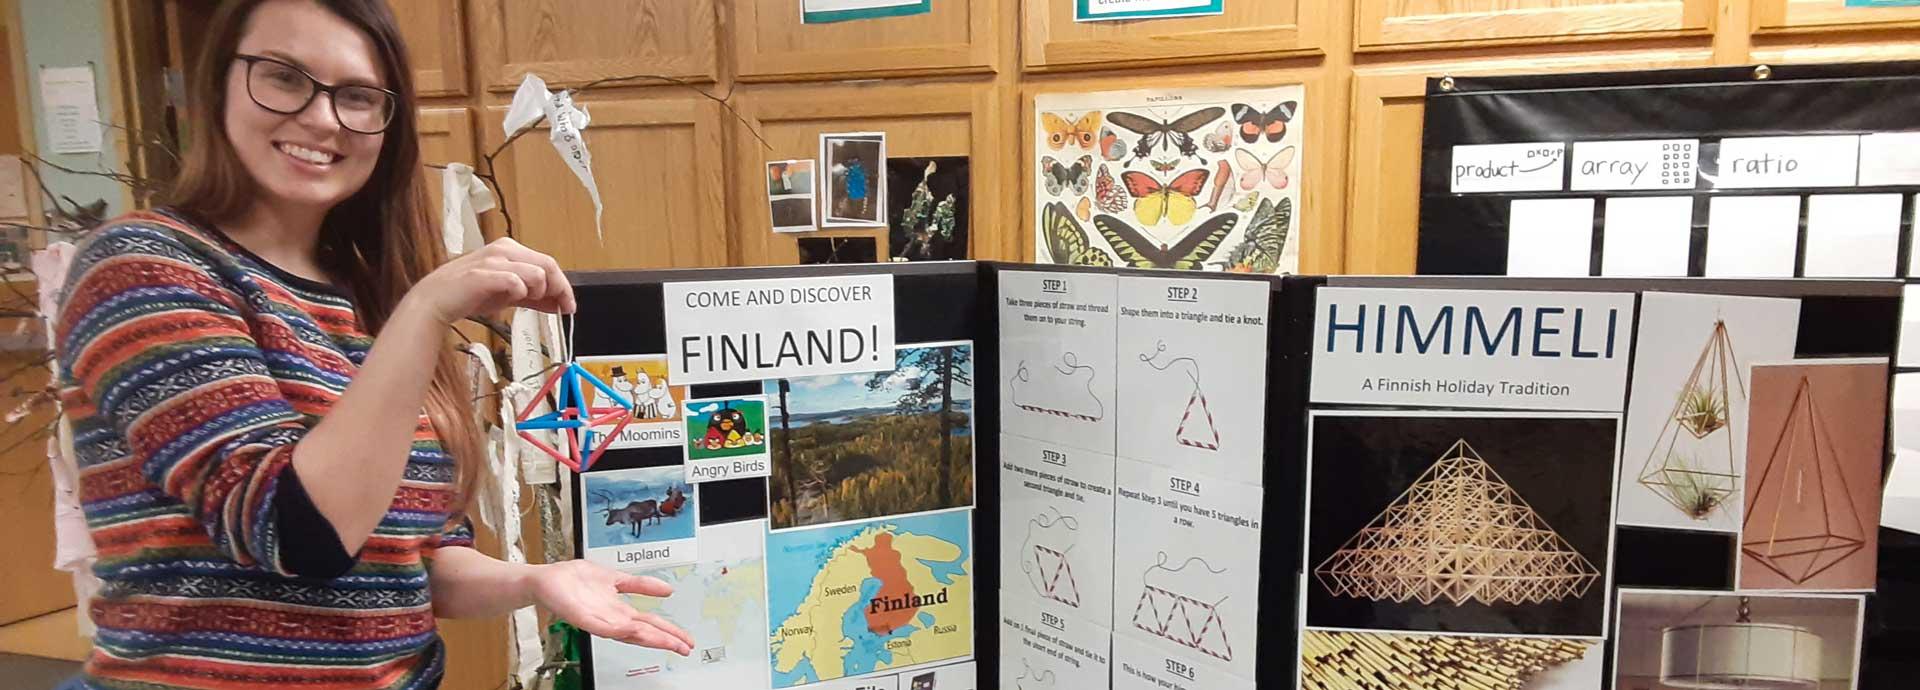 Fulbright Finland grantee Sanni Törmänen with posters and information about Finland at an international fair